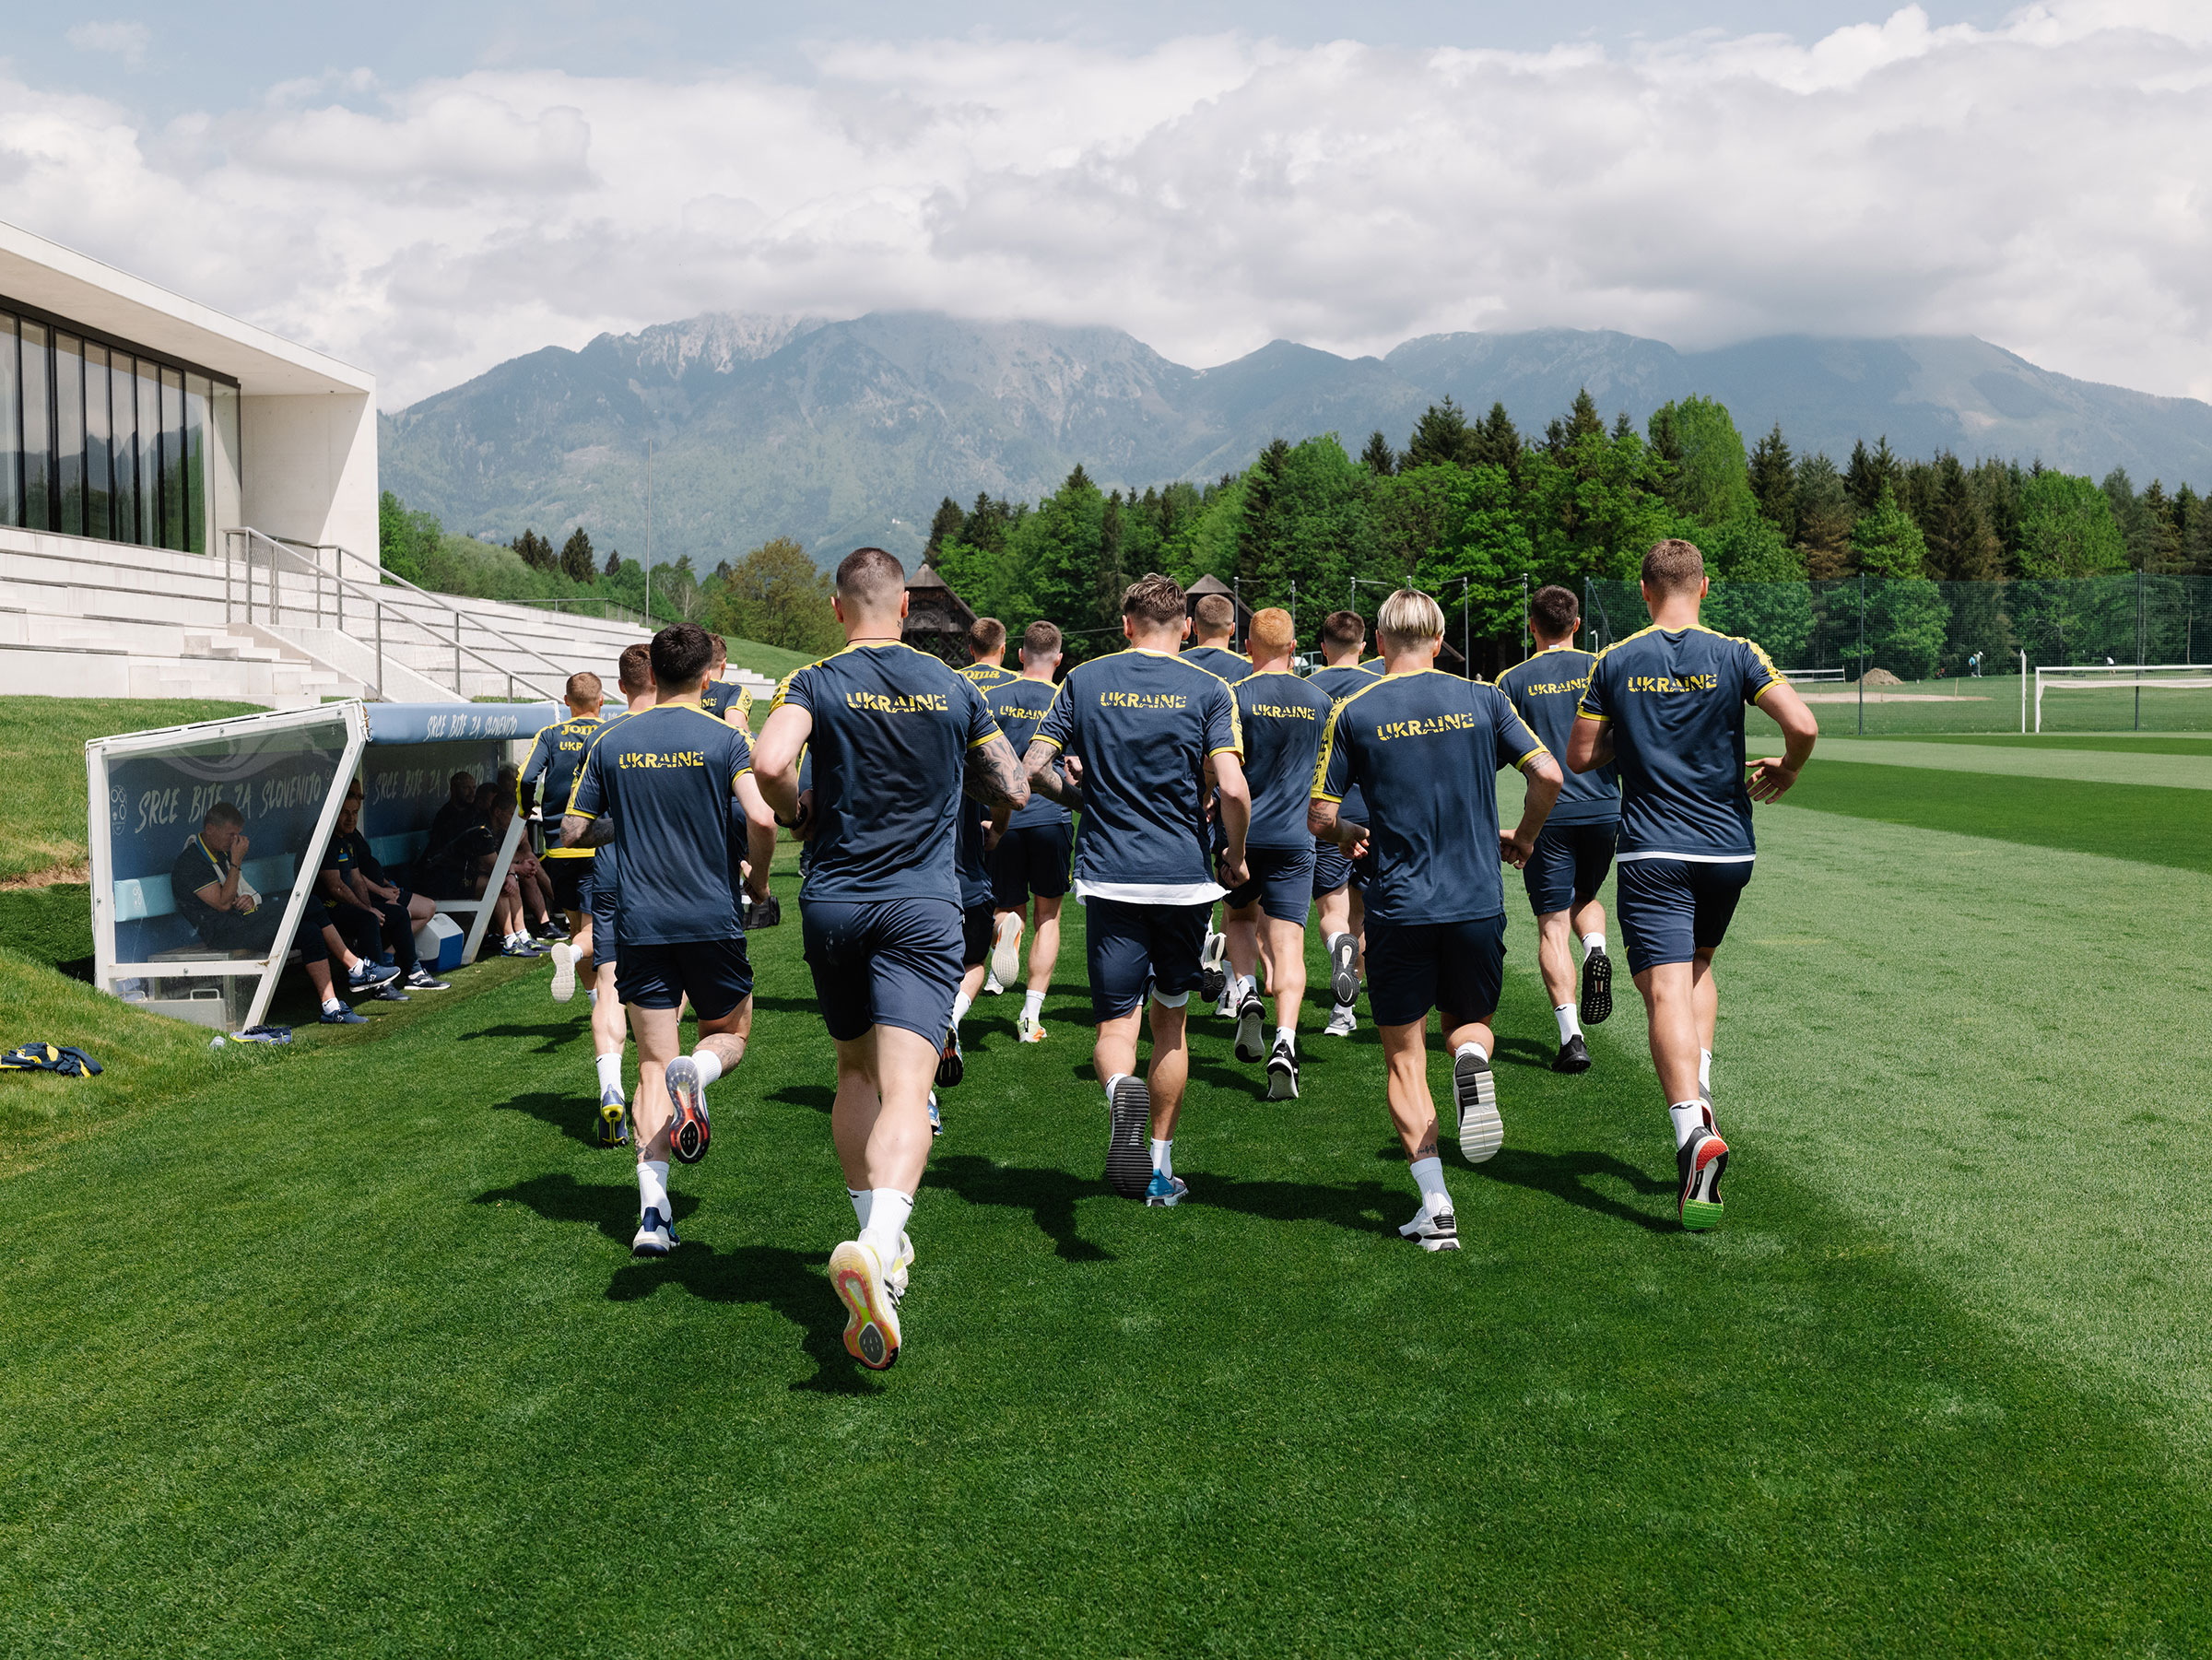 Ukraine’s men’s national soccer team needs to defeat Scotland in a playoff game in Glasgow on June 1 in order to advance to securing a spot in November’s FIFA World Cup in Qatar (Ciril Jazbec for TIME)